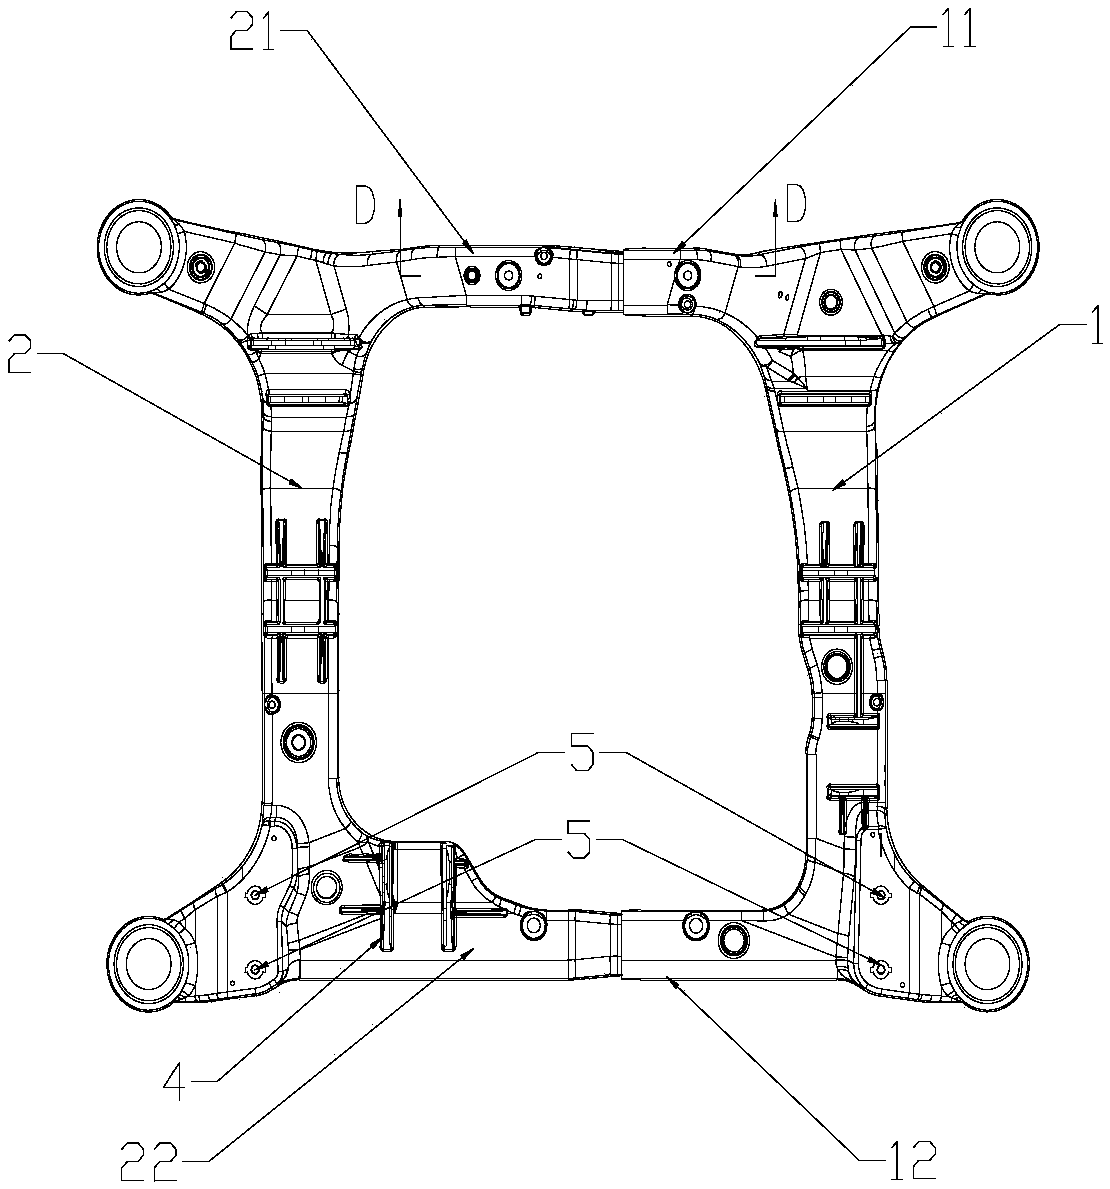 Mutually inserted rear auxiliary frame